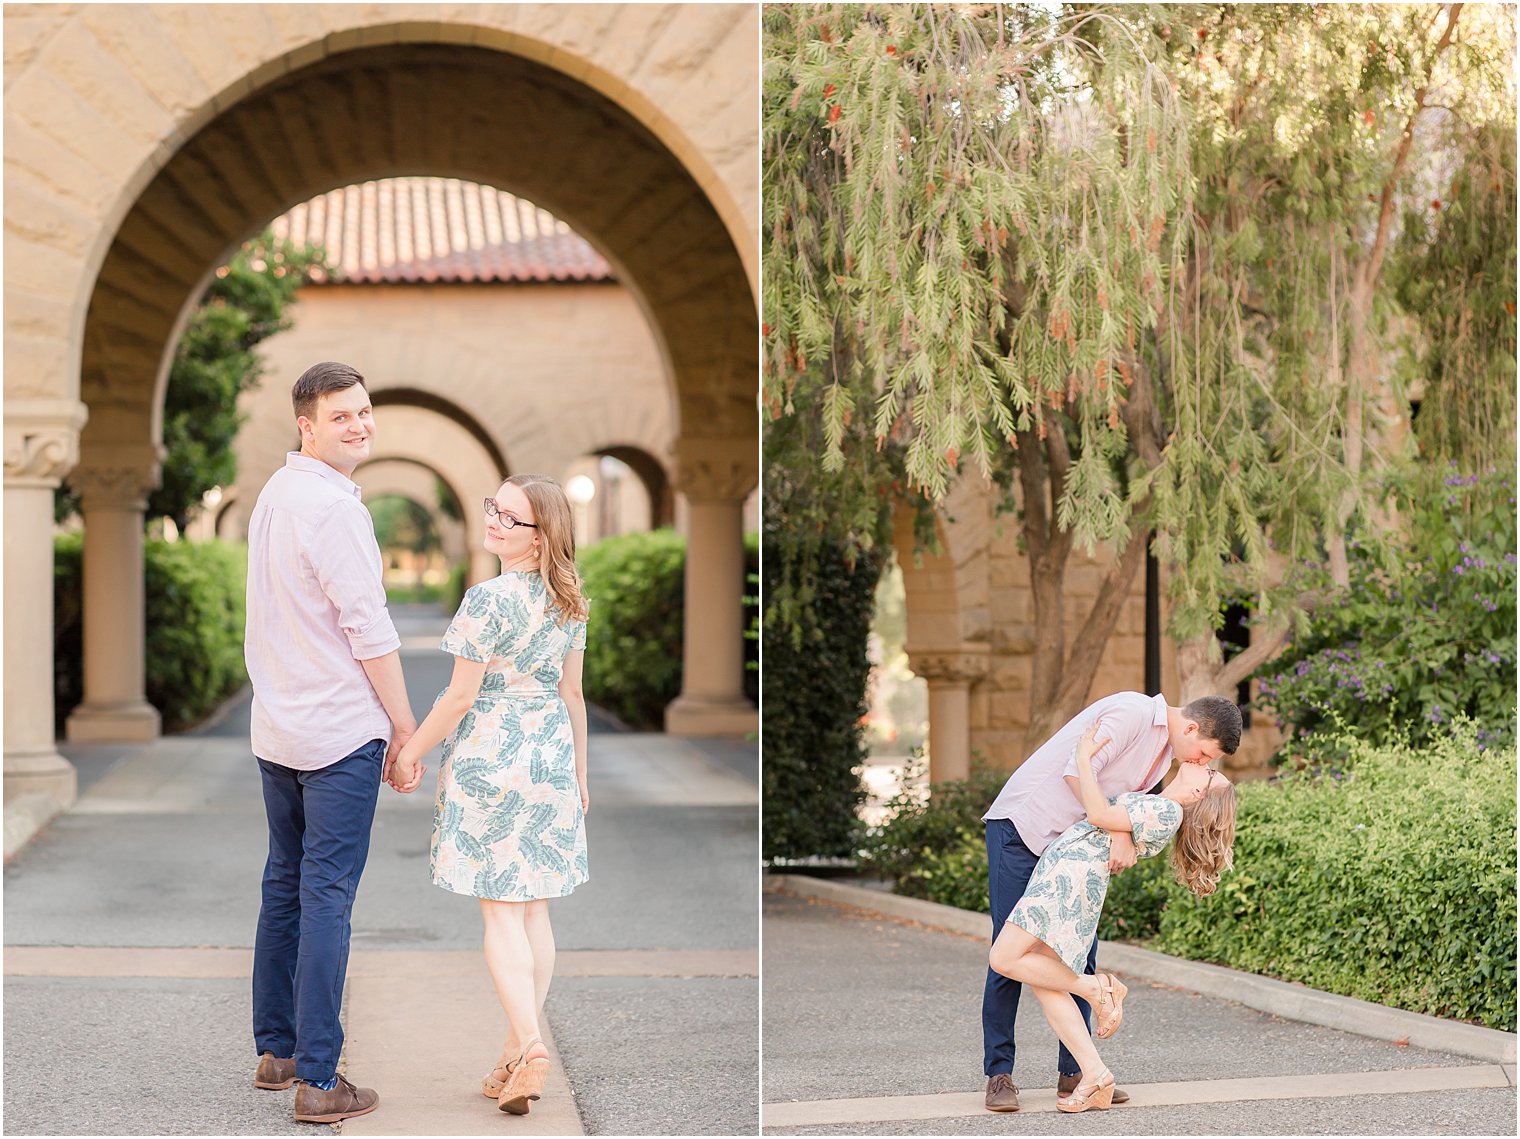 Couple posing for engagement photos at Stanford University